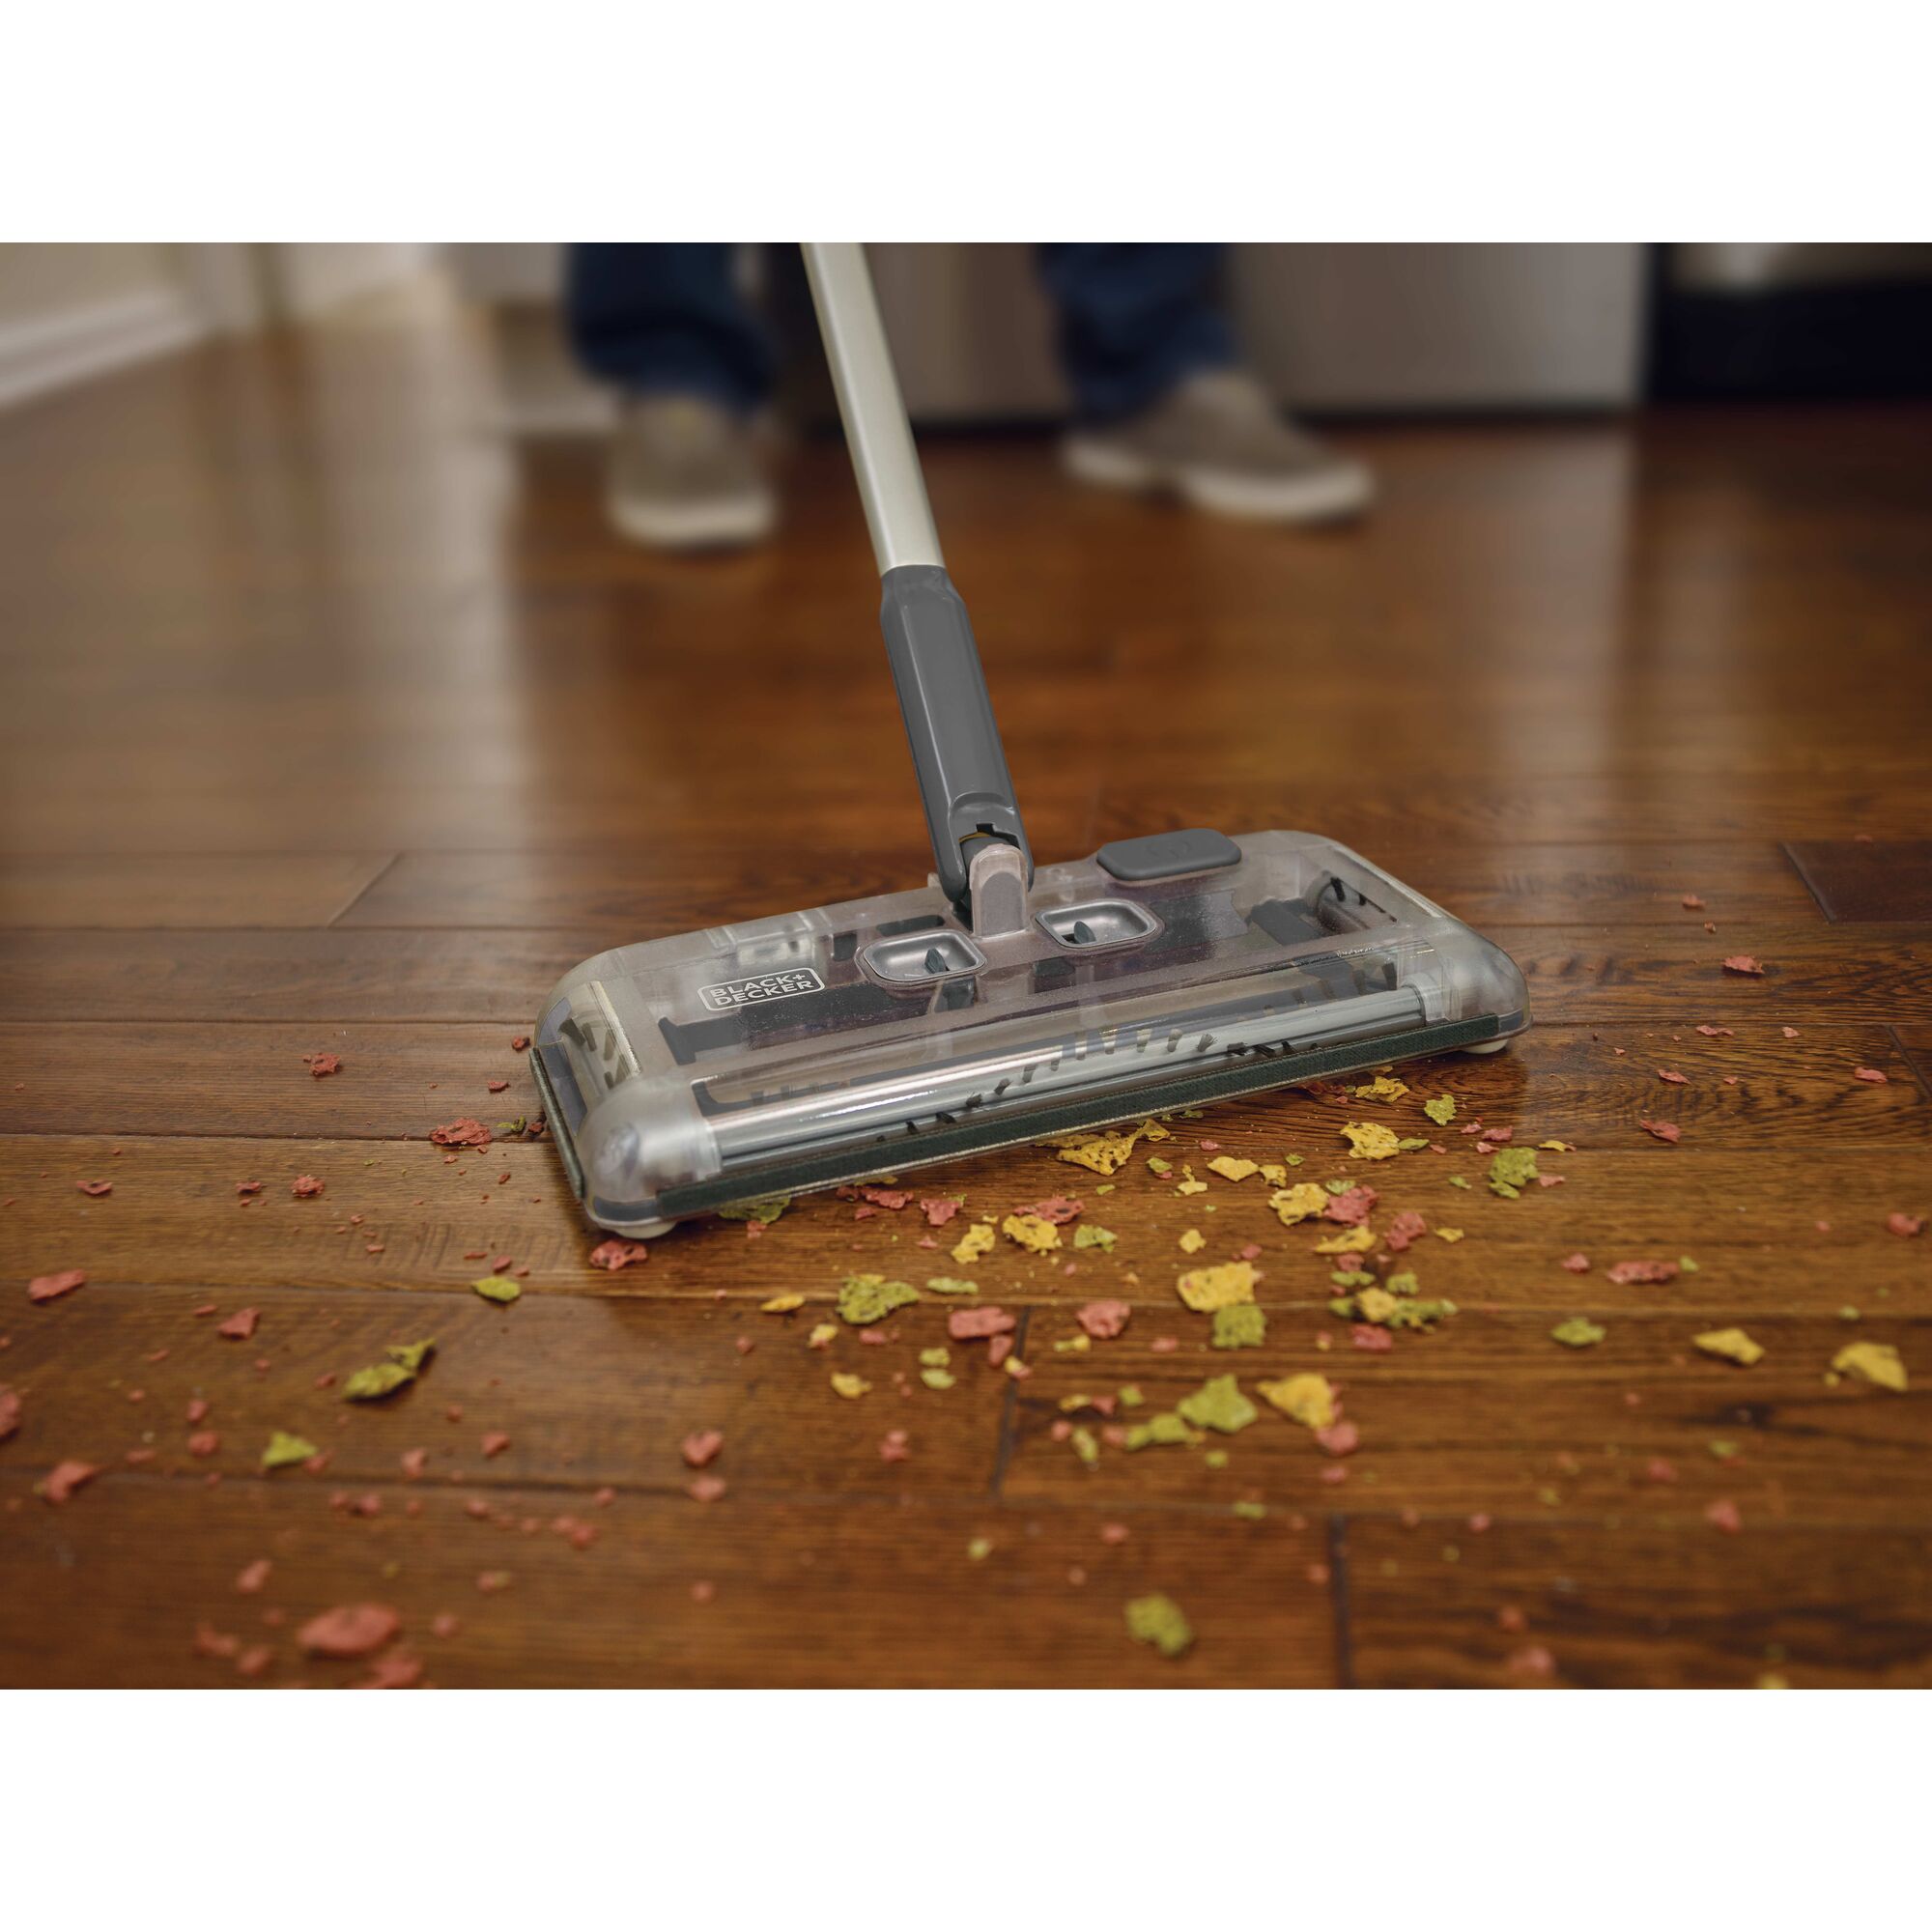 Person cleaning floor with floor sweeper